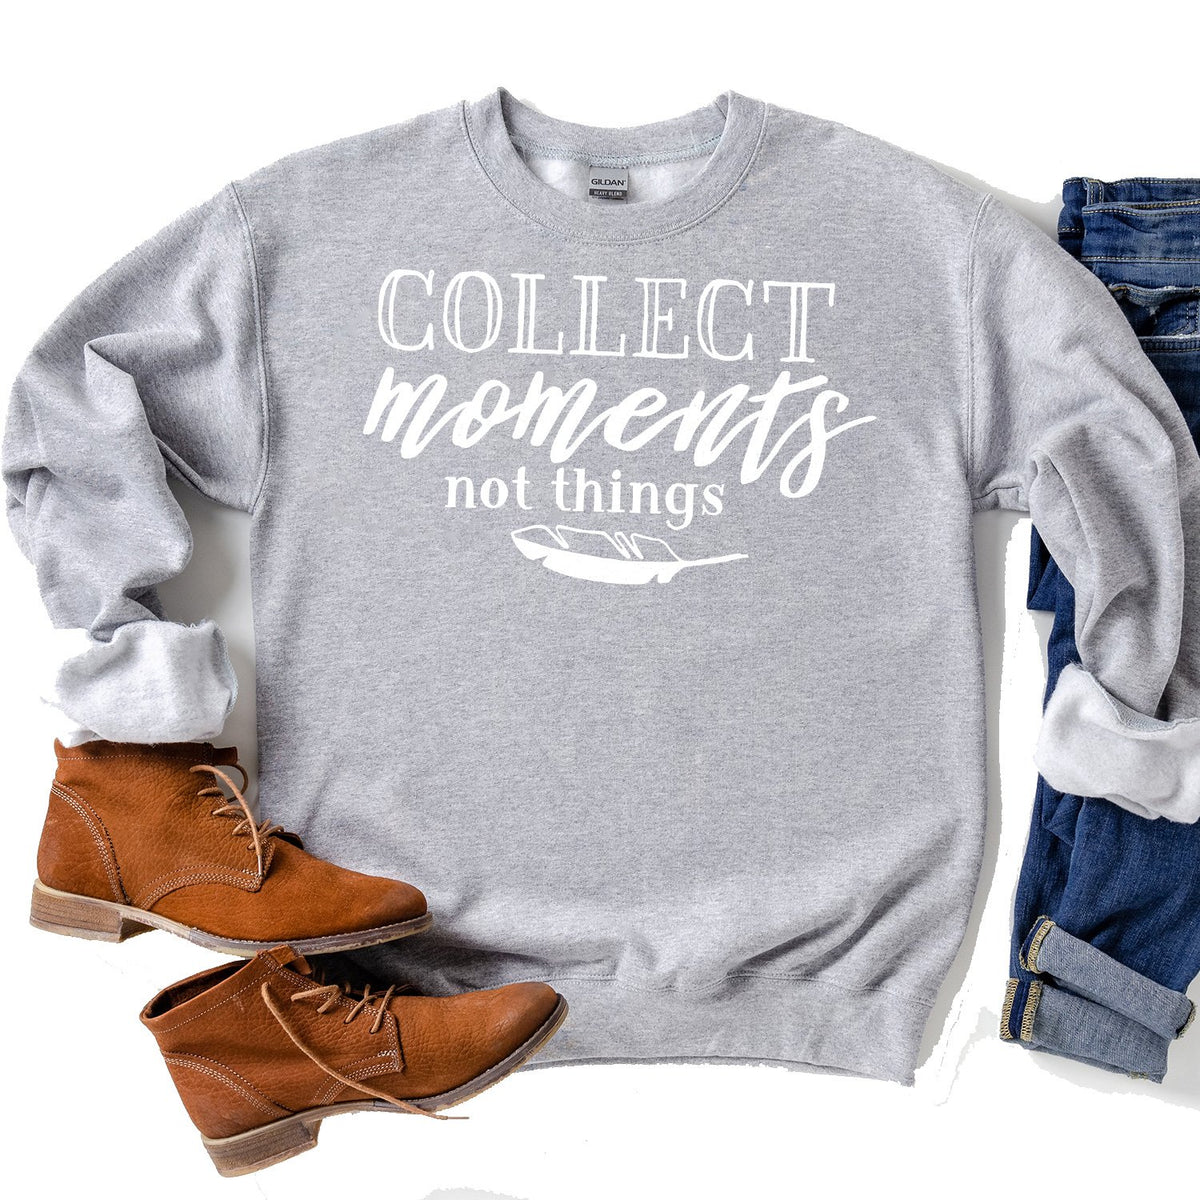 Collect Moments Not Things - Long Sleeve Heavy Crewneck Sweatshirt